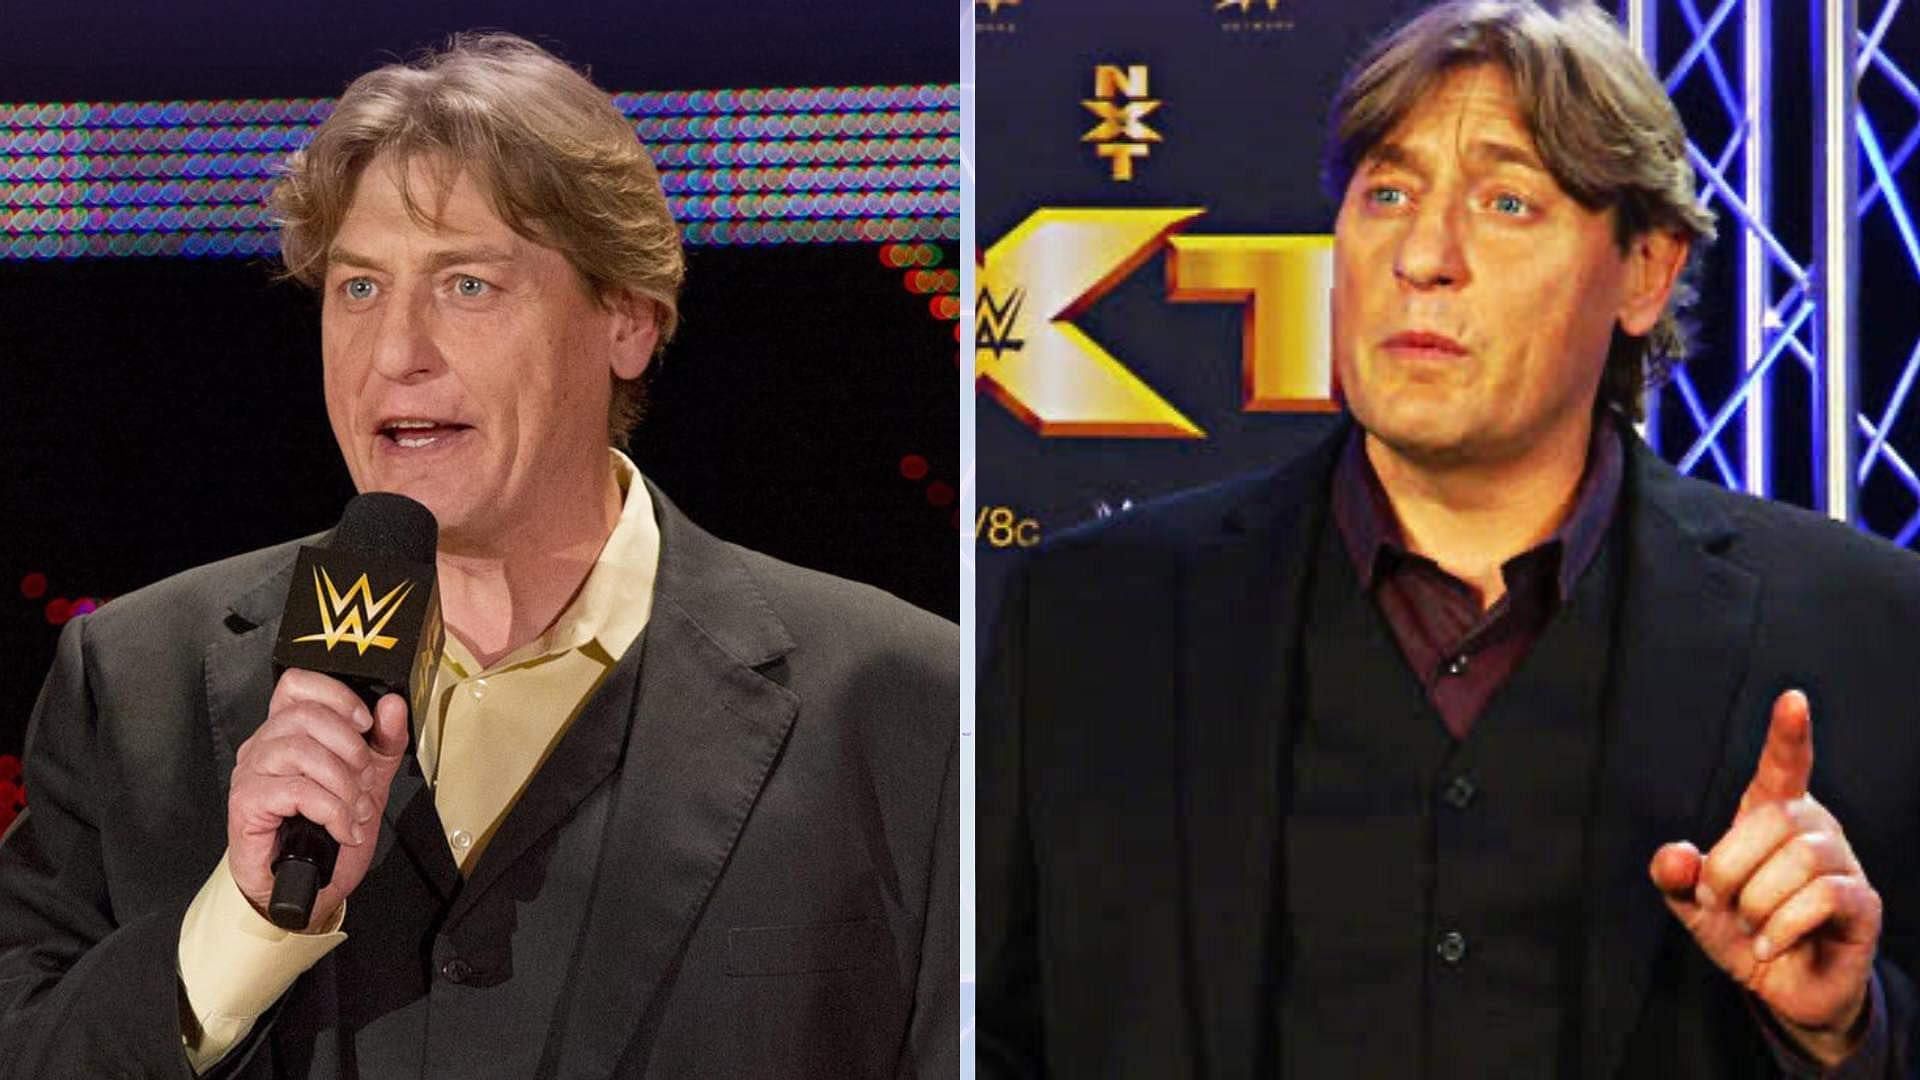 William Regal is a former on-screen authority figure on WWE NXT.